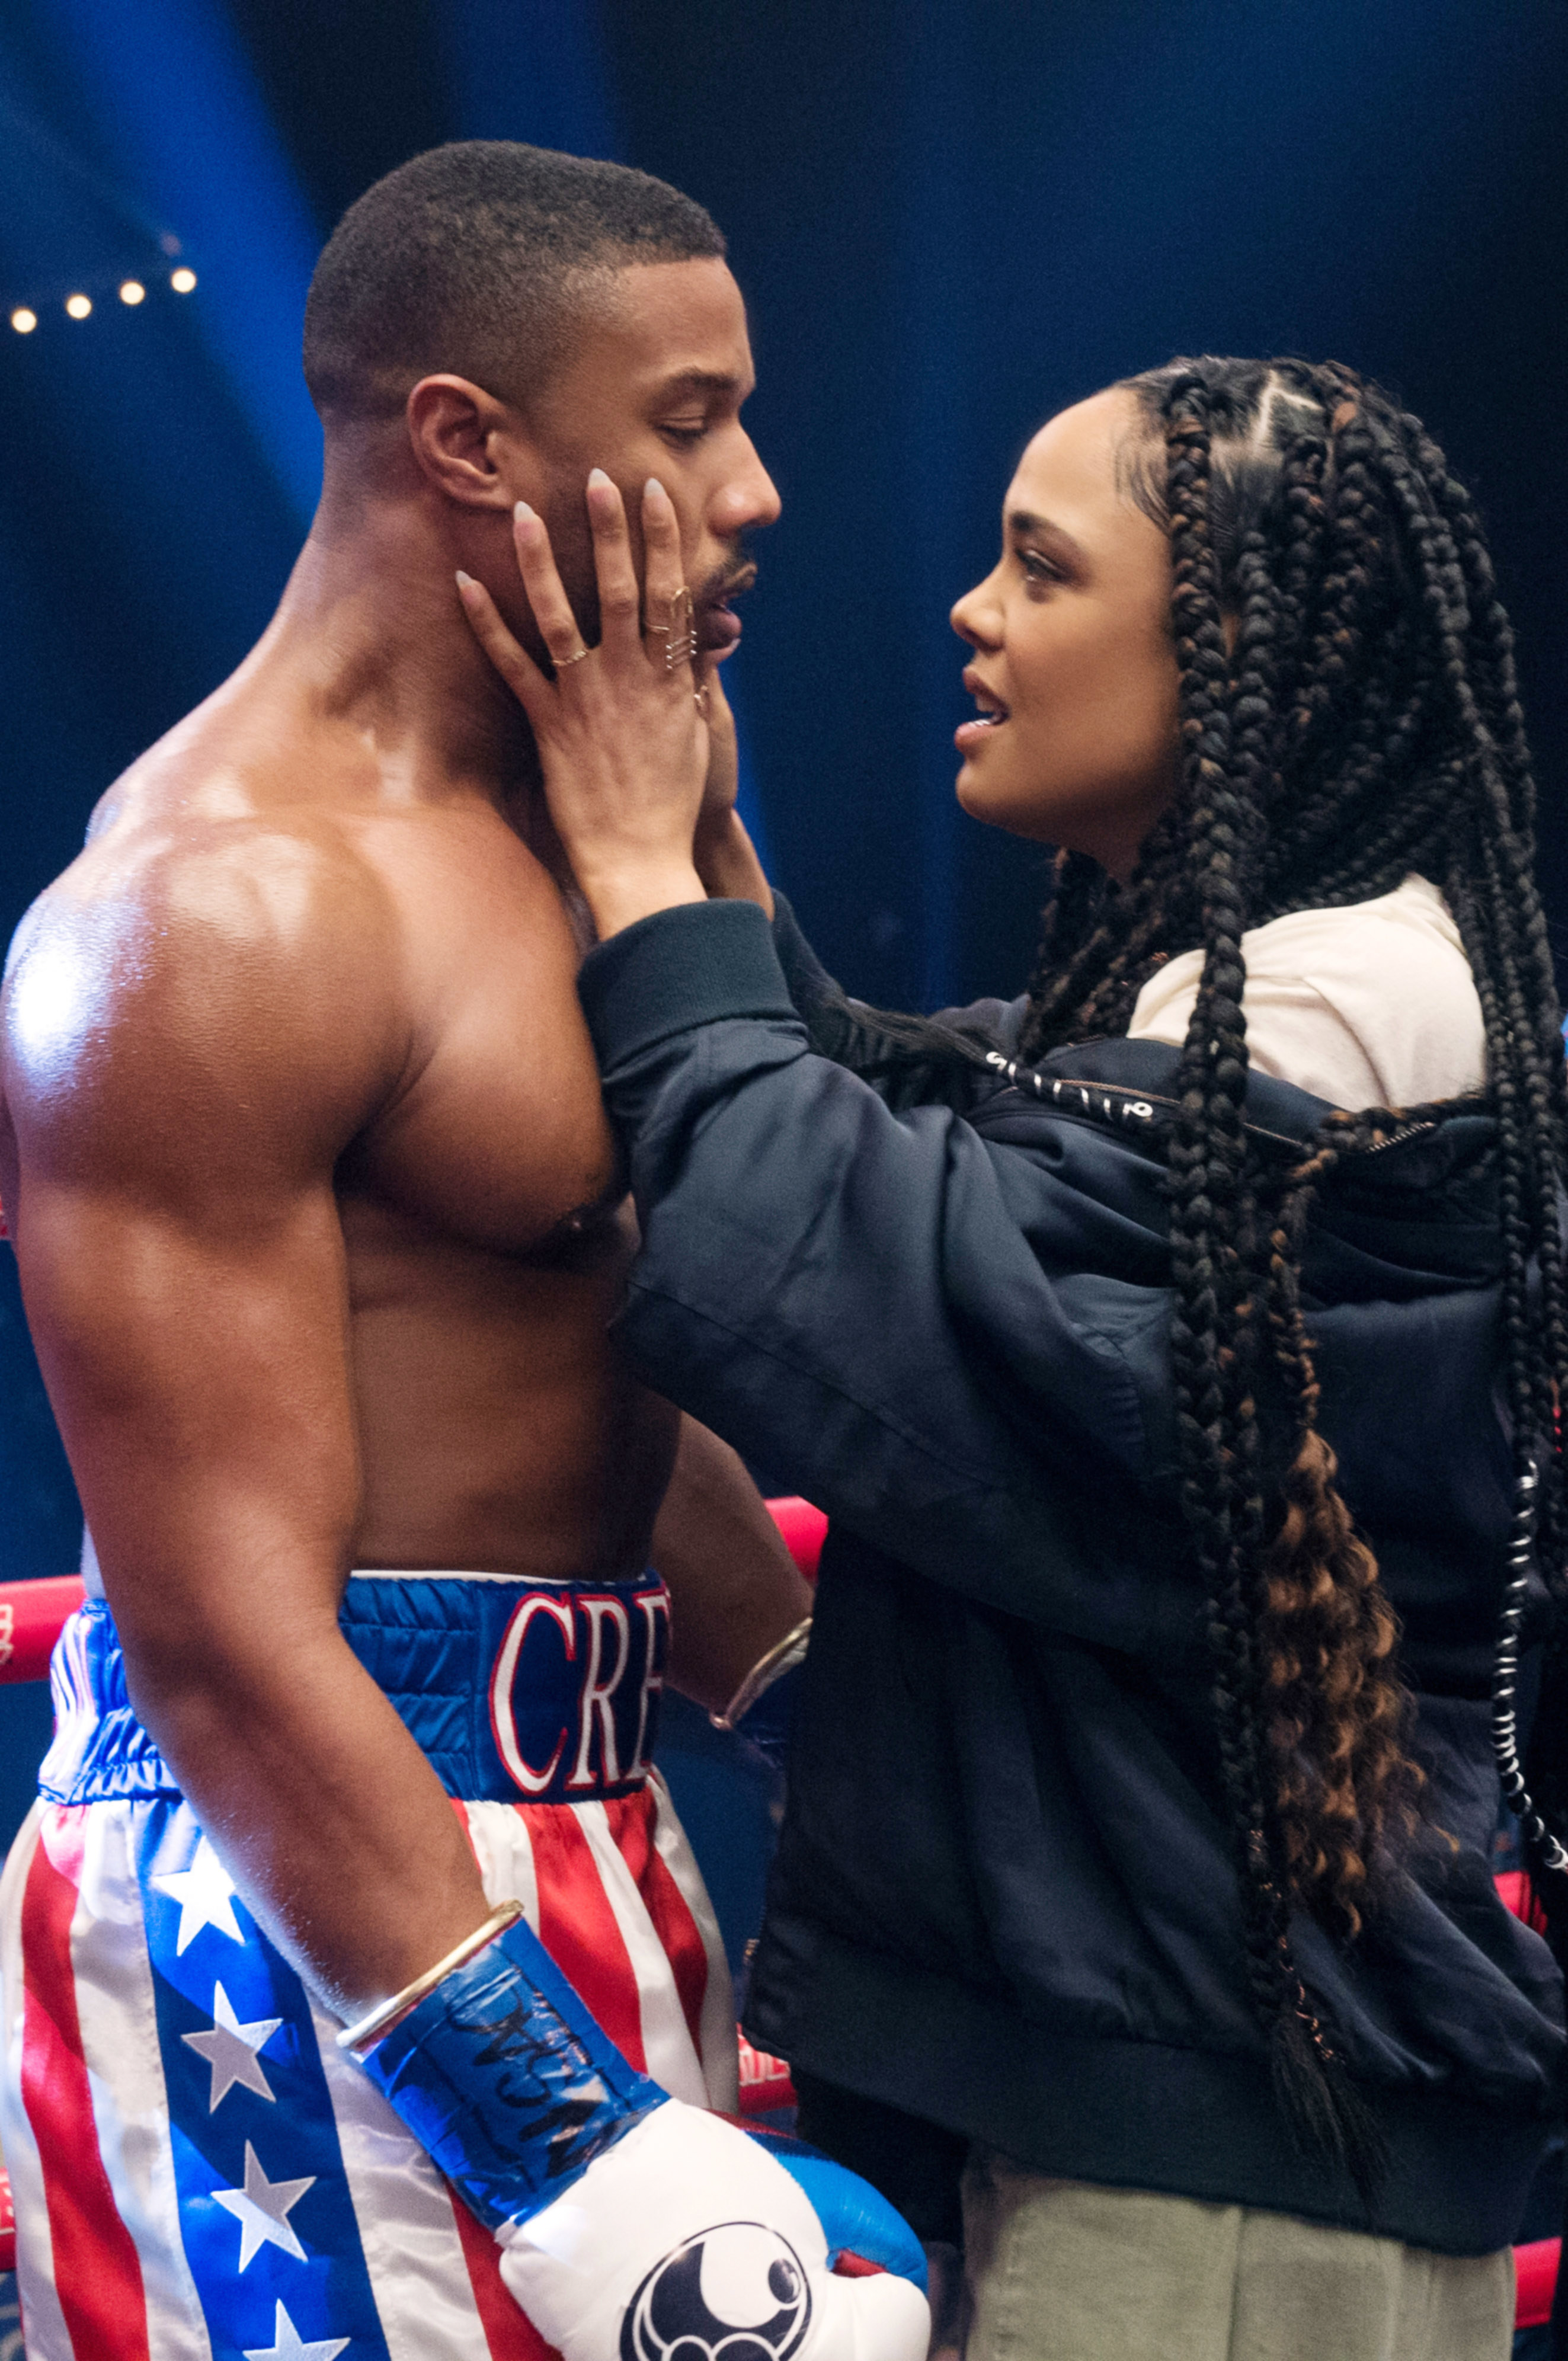 Tessa holding Michael&#x27;s face as she talks to him inside a boxing ring in a scene from Creed